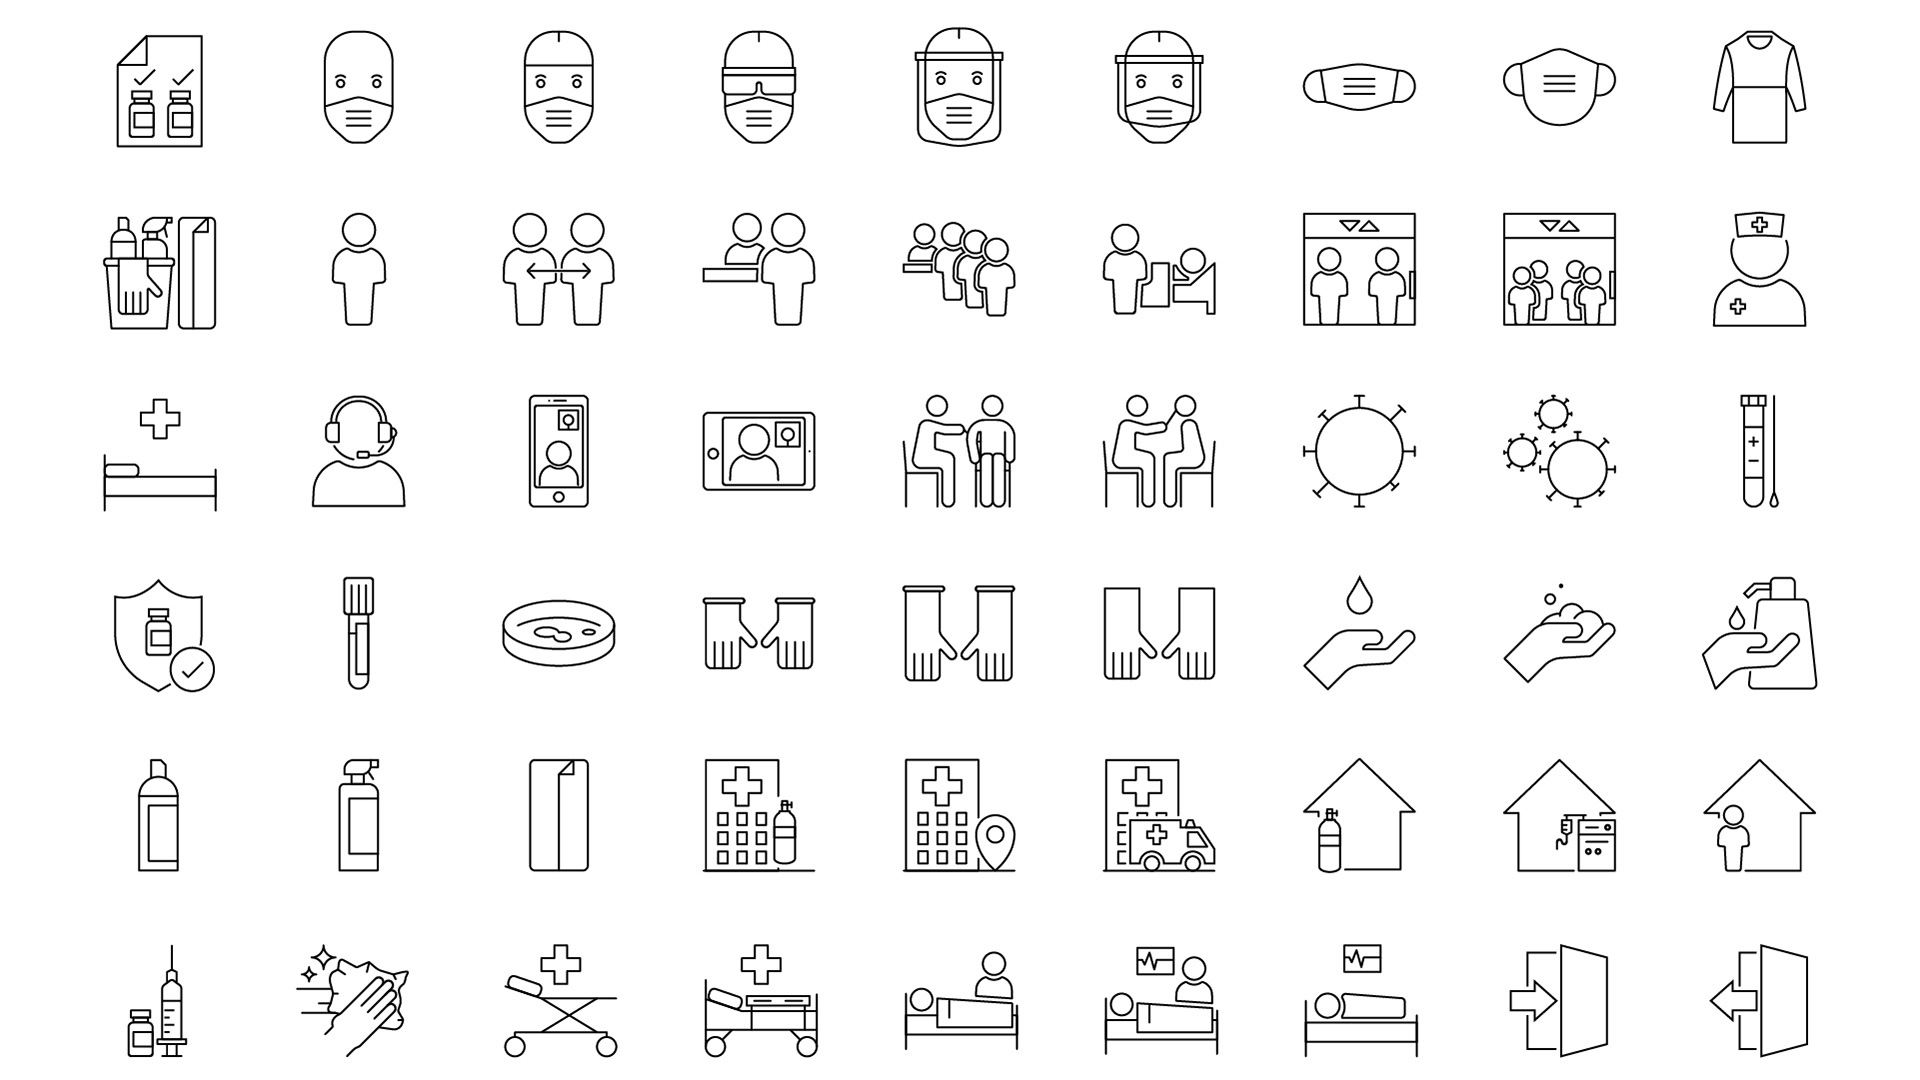 image of icon examples